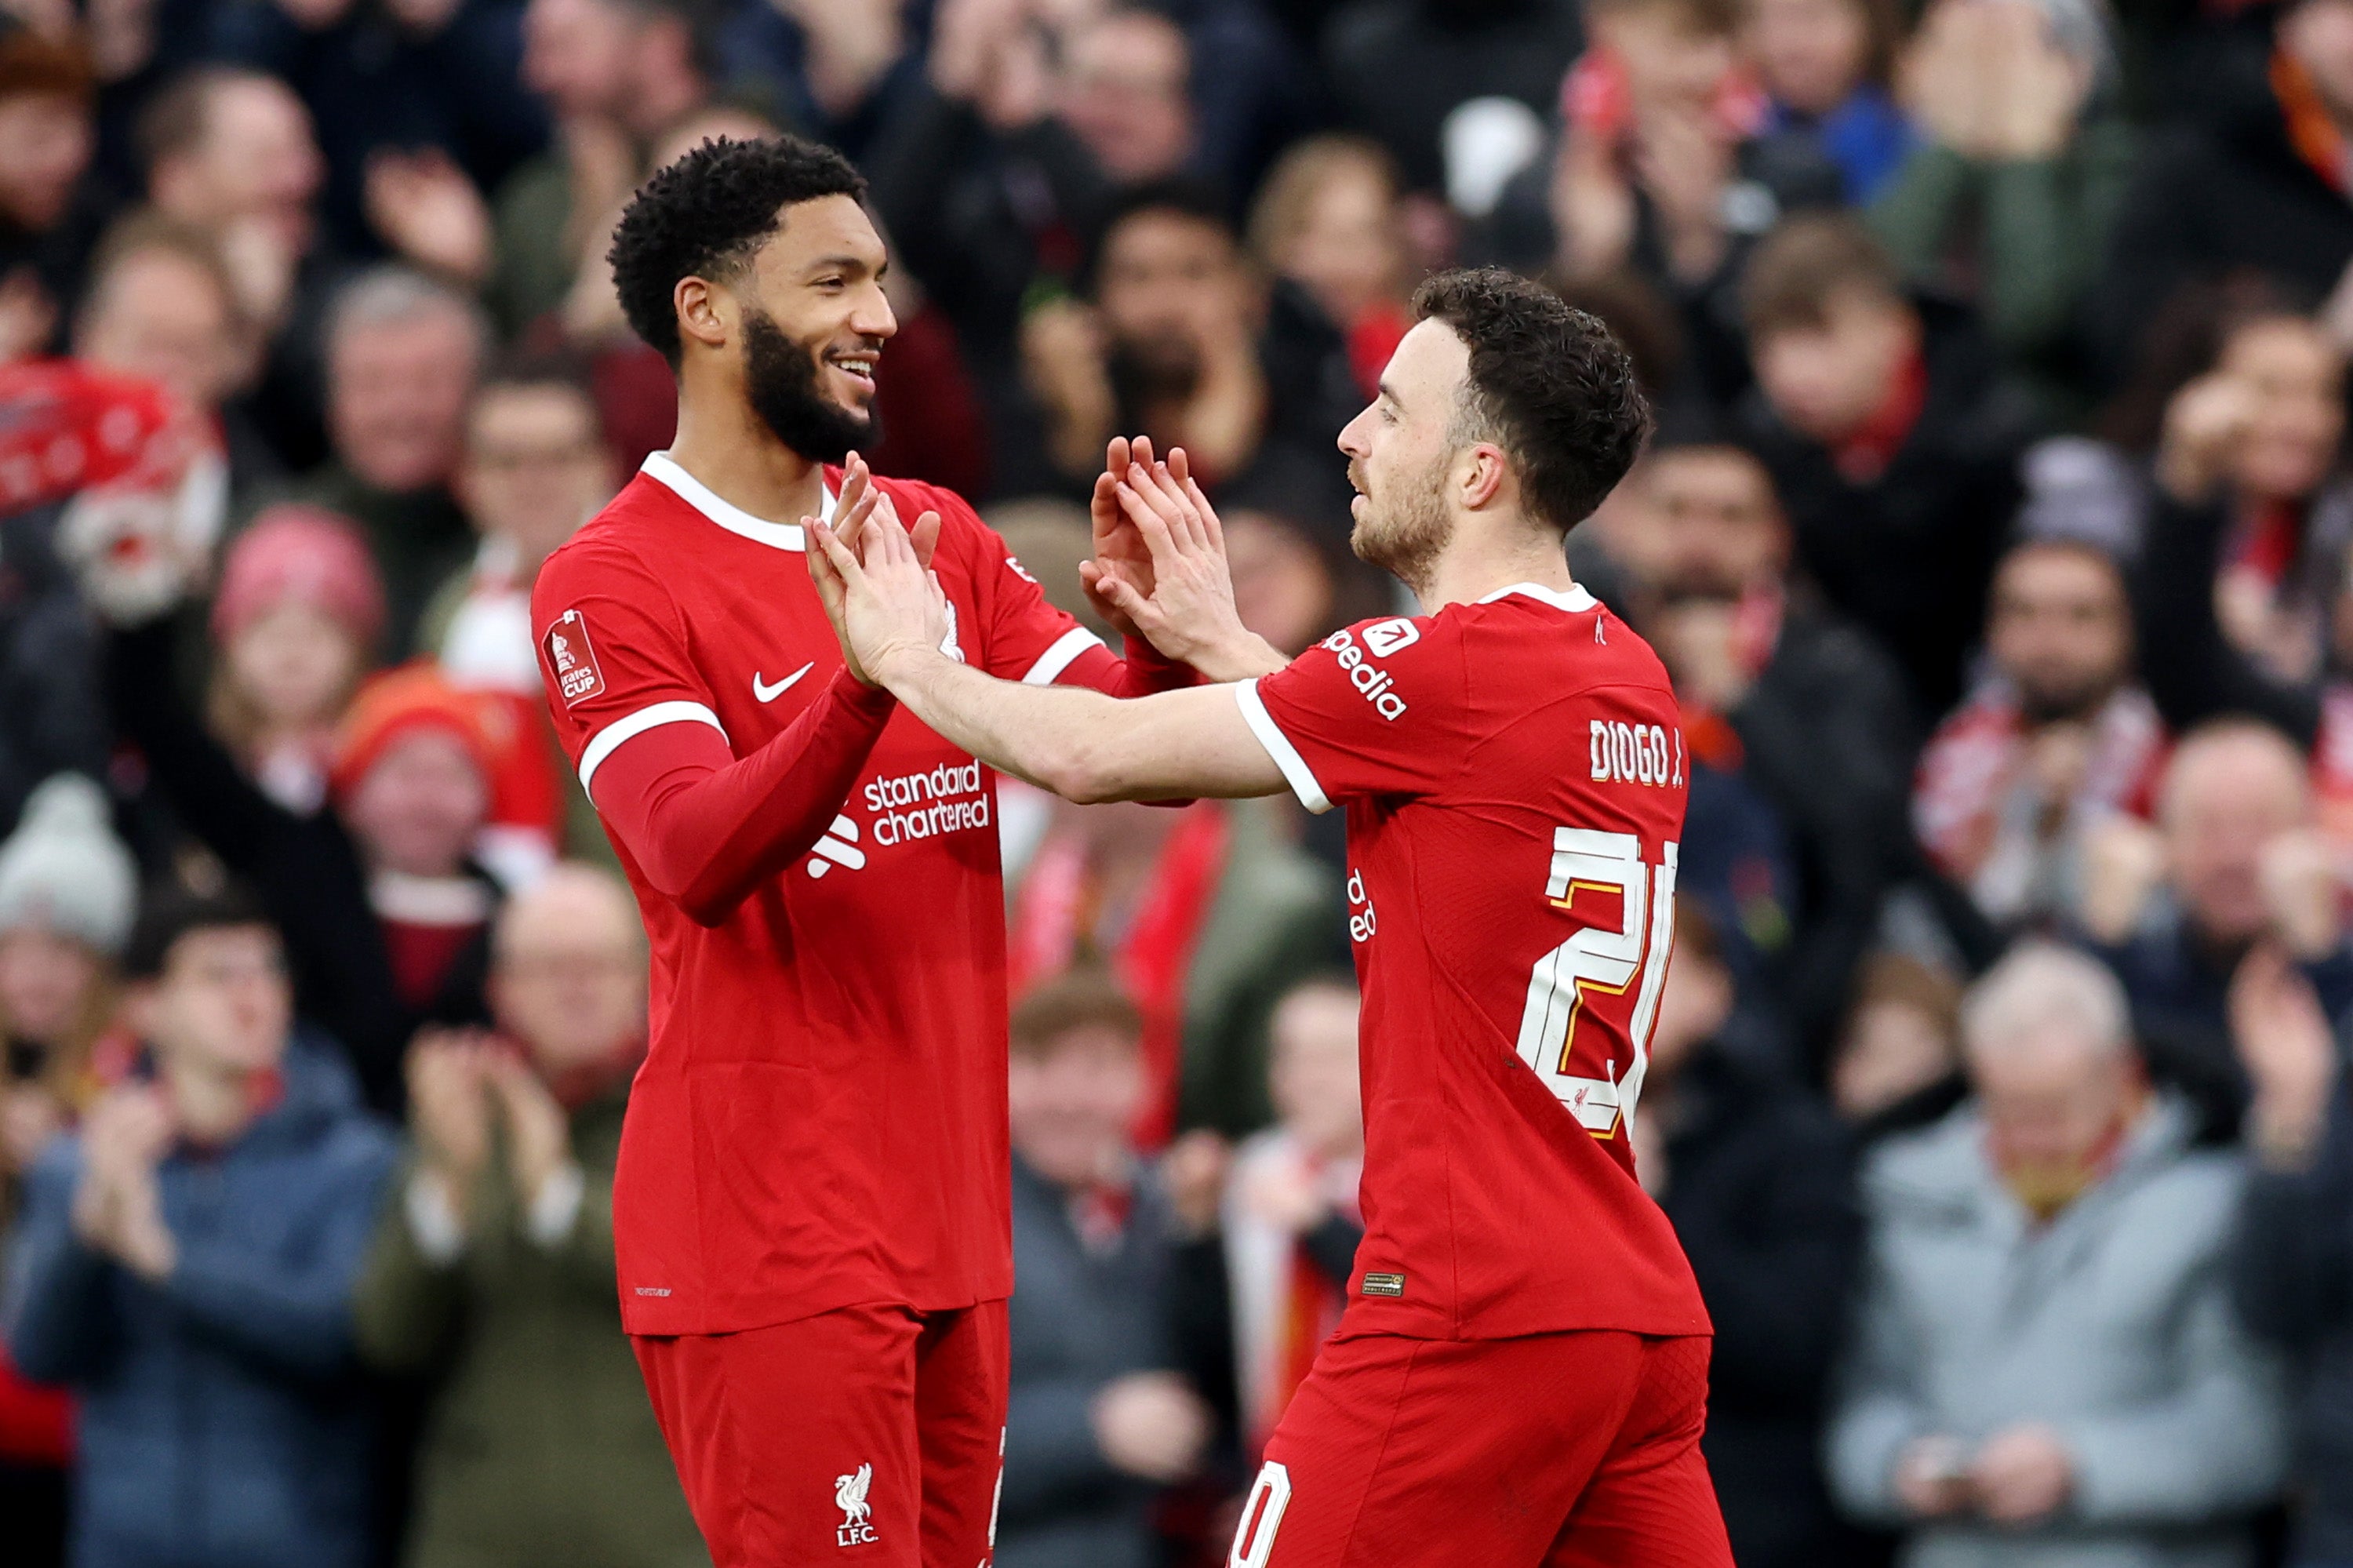 Gomez celebrates with Diogo Jota in Liverpool’s 5-2 win over Norwich City in the FA Cup